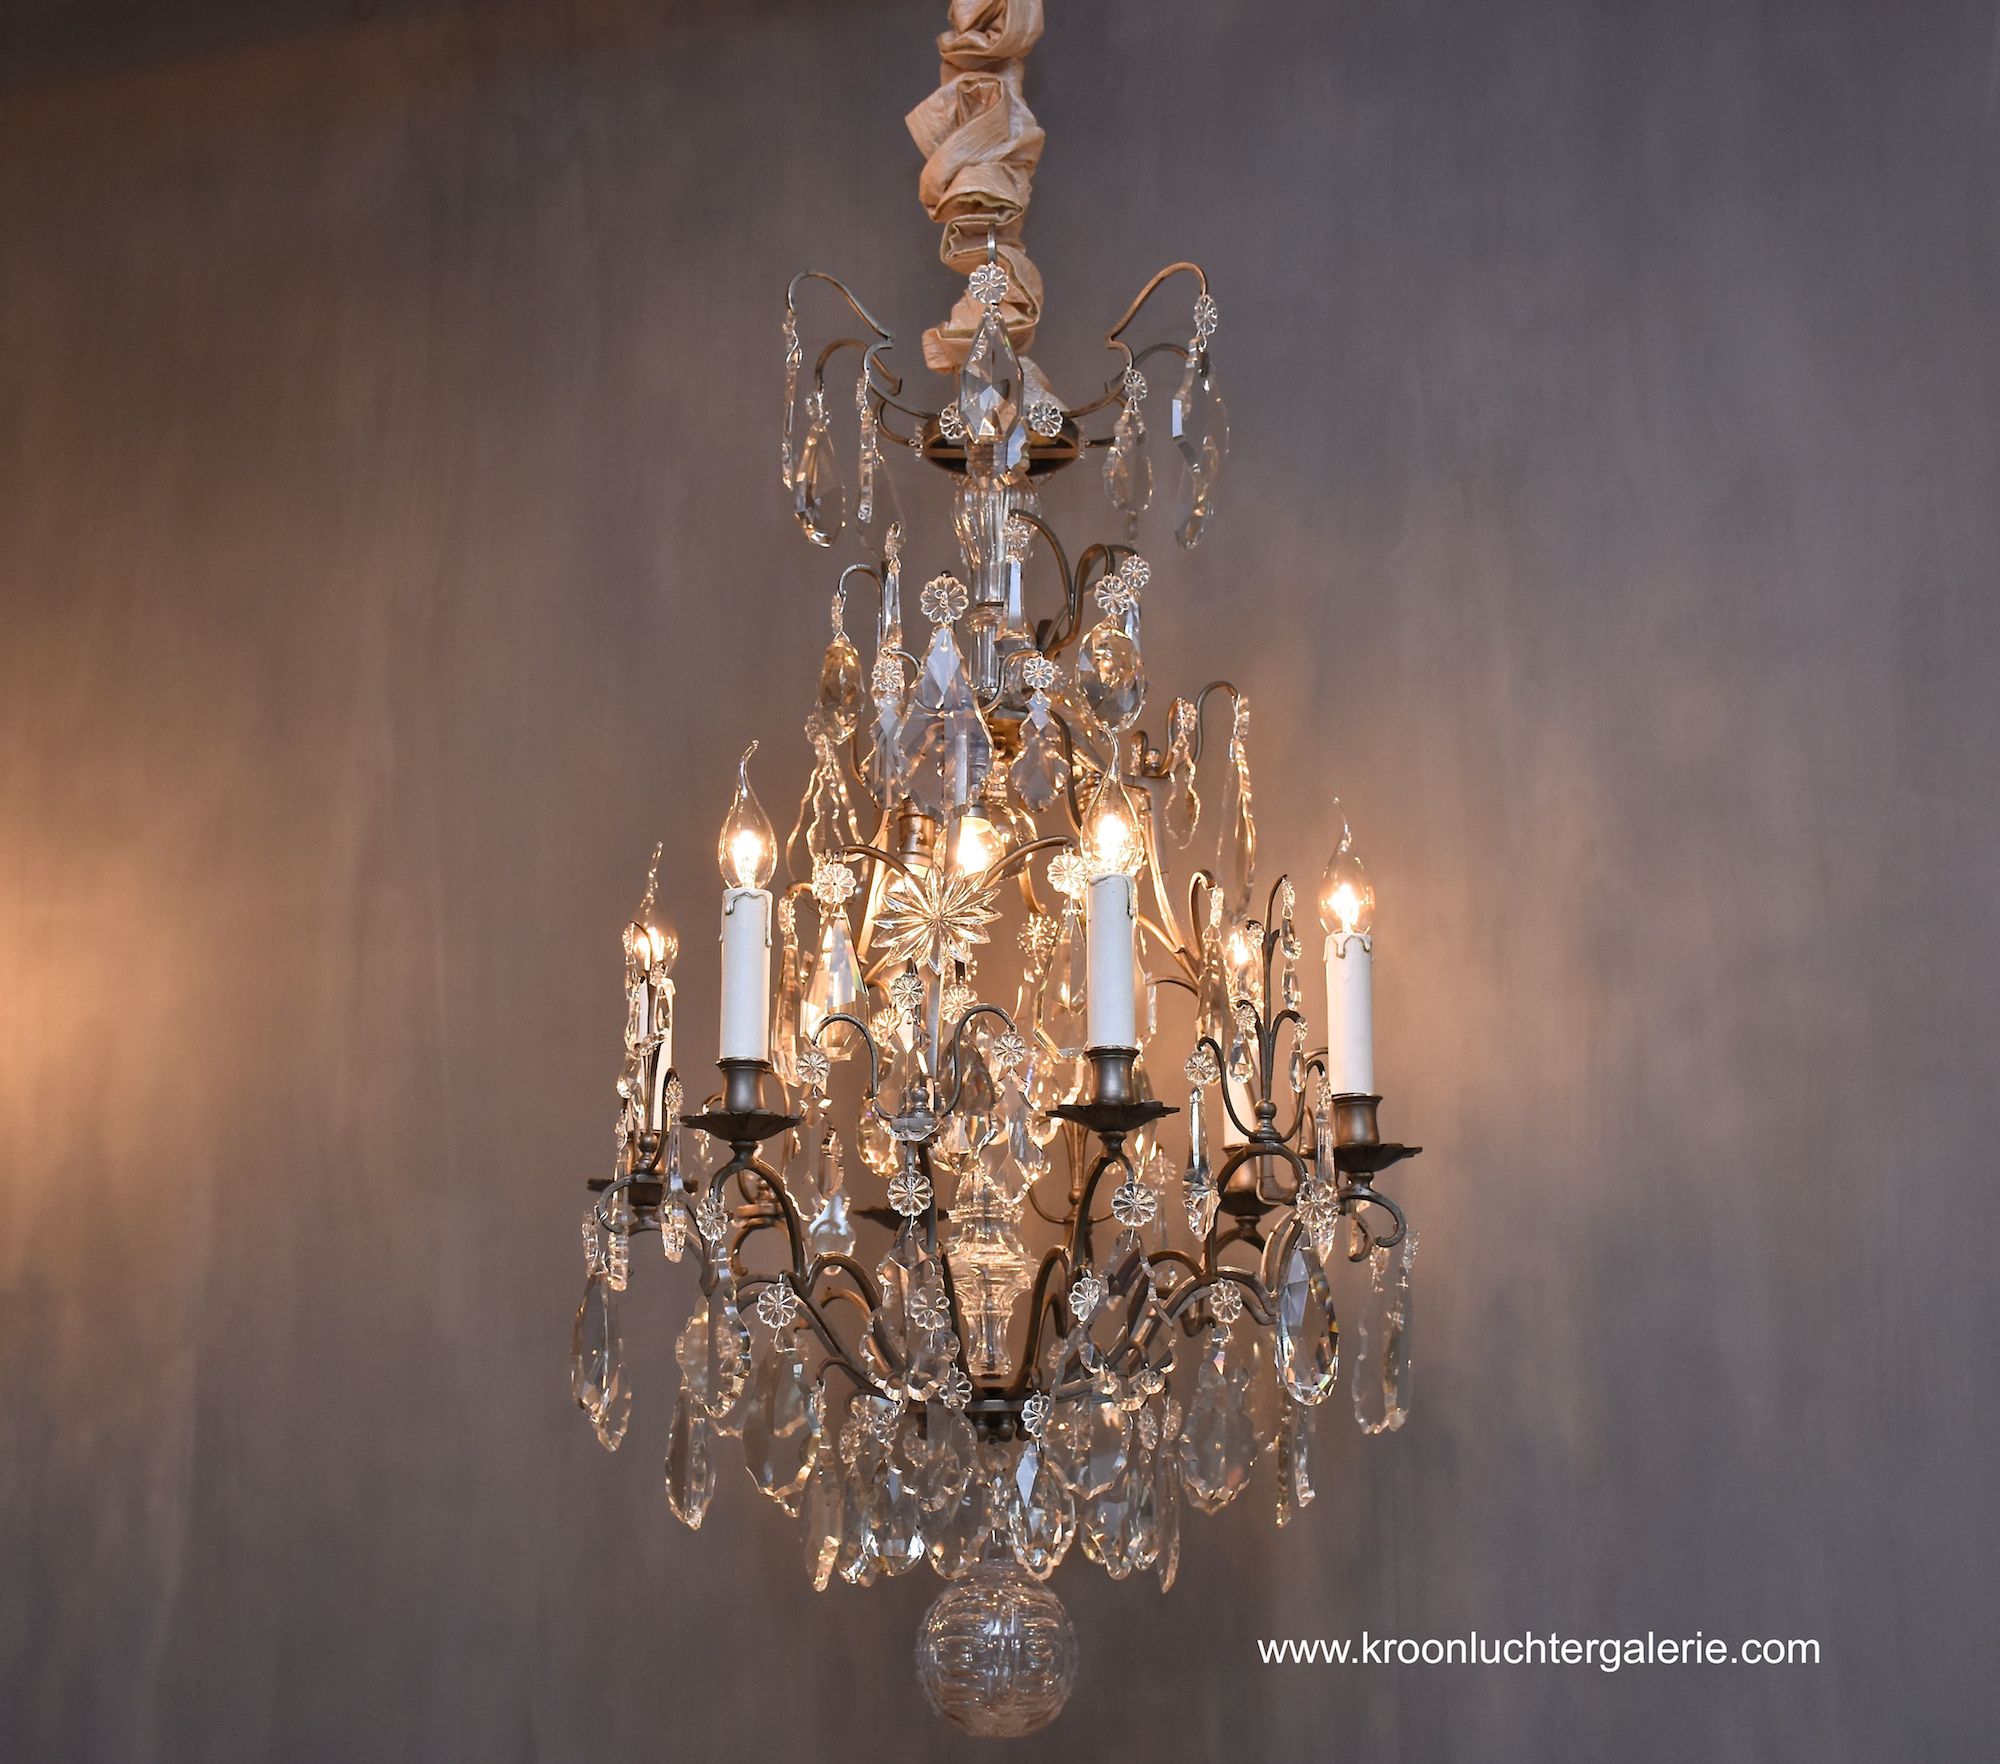 French chandelier in the style of Louis XV